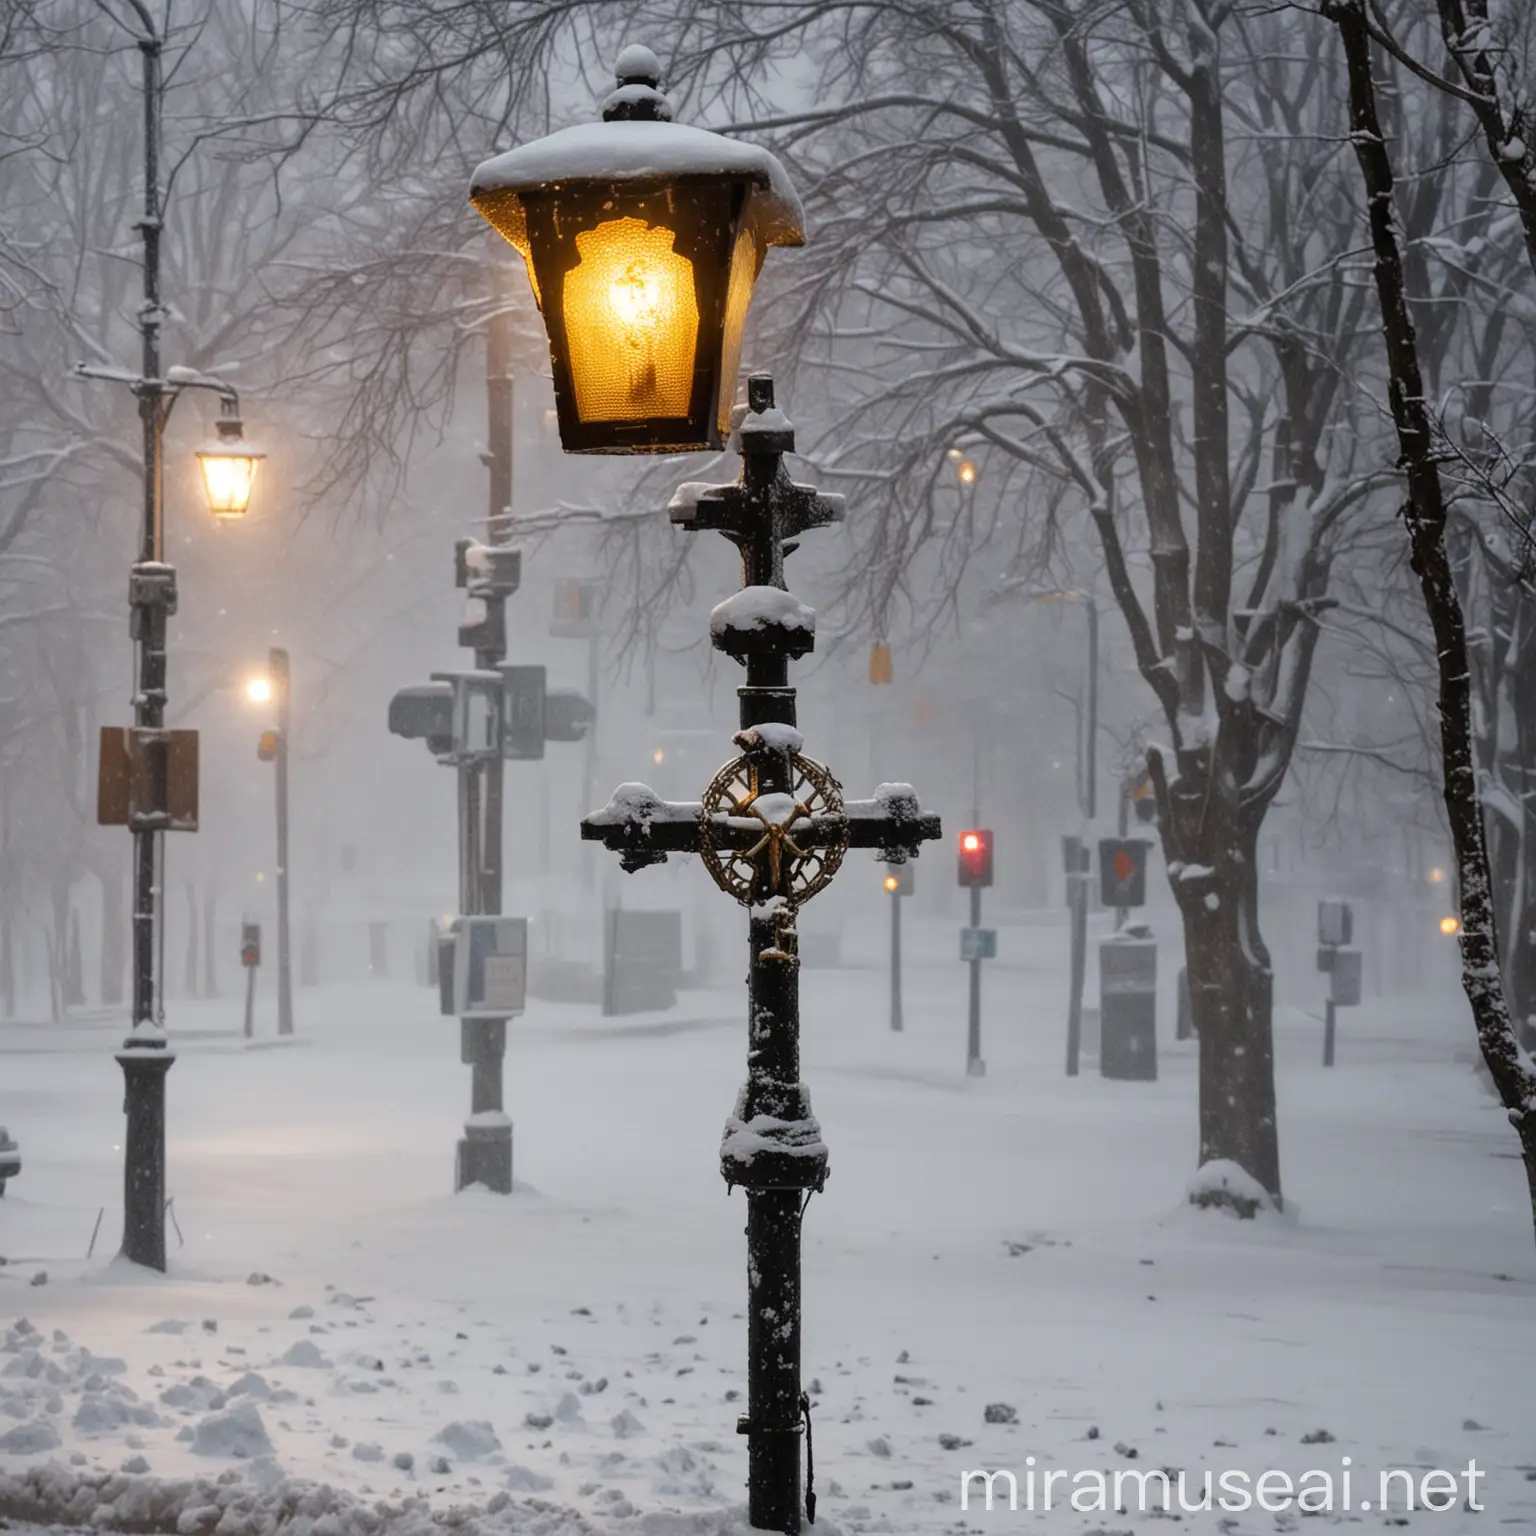 an orthodox cross next to a street lamp with traffic lights in the background during a blizzard, everything buried in snow at night